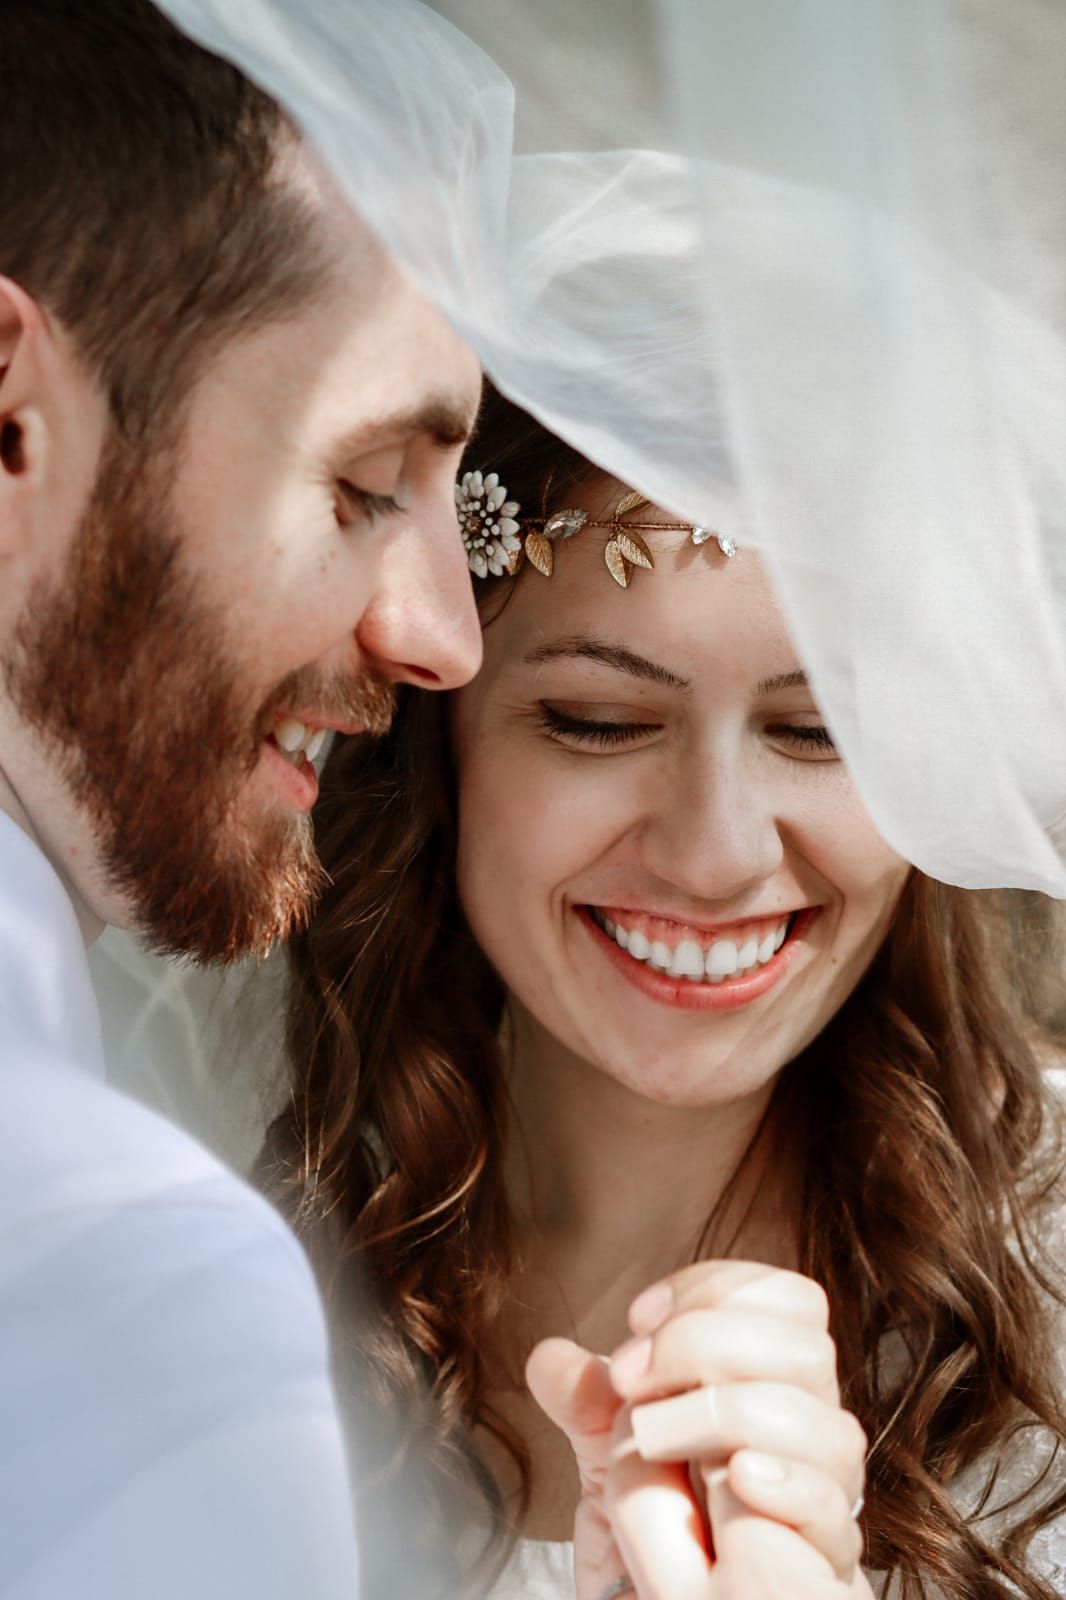 Christian bride smiles with her new husband while looking at her ring